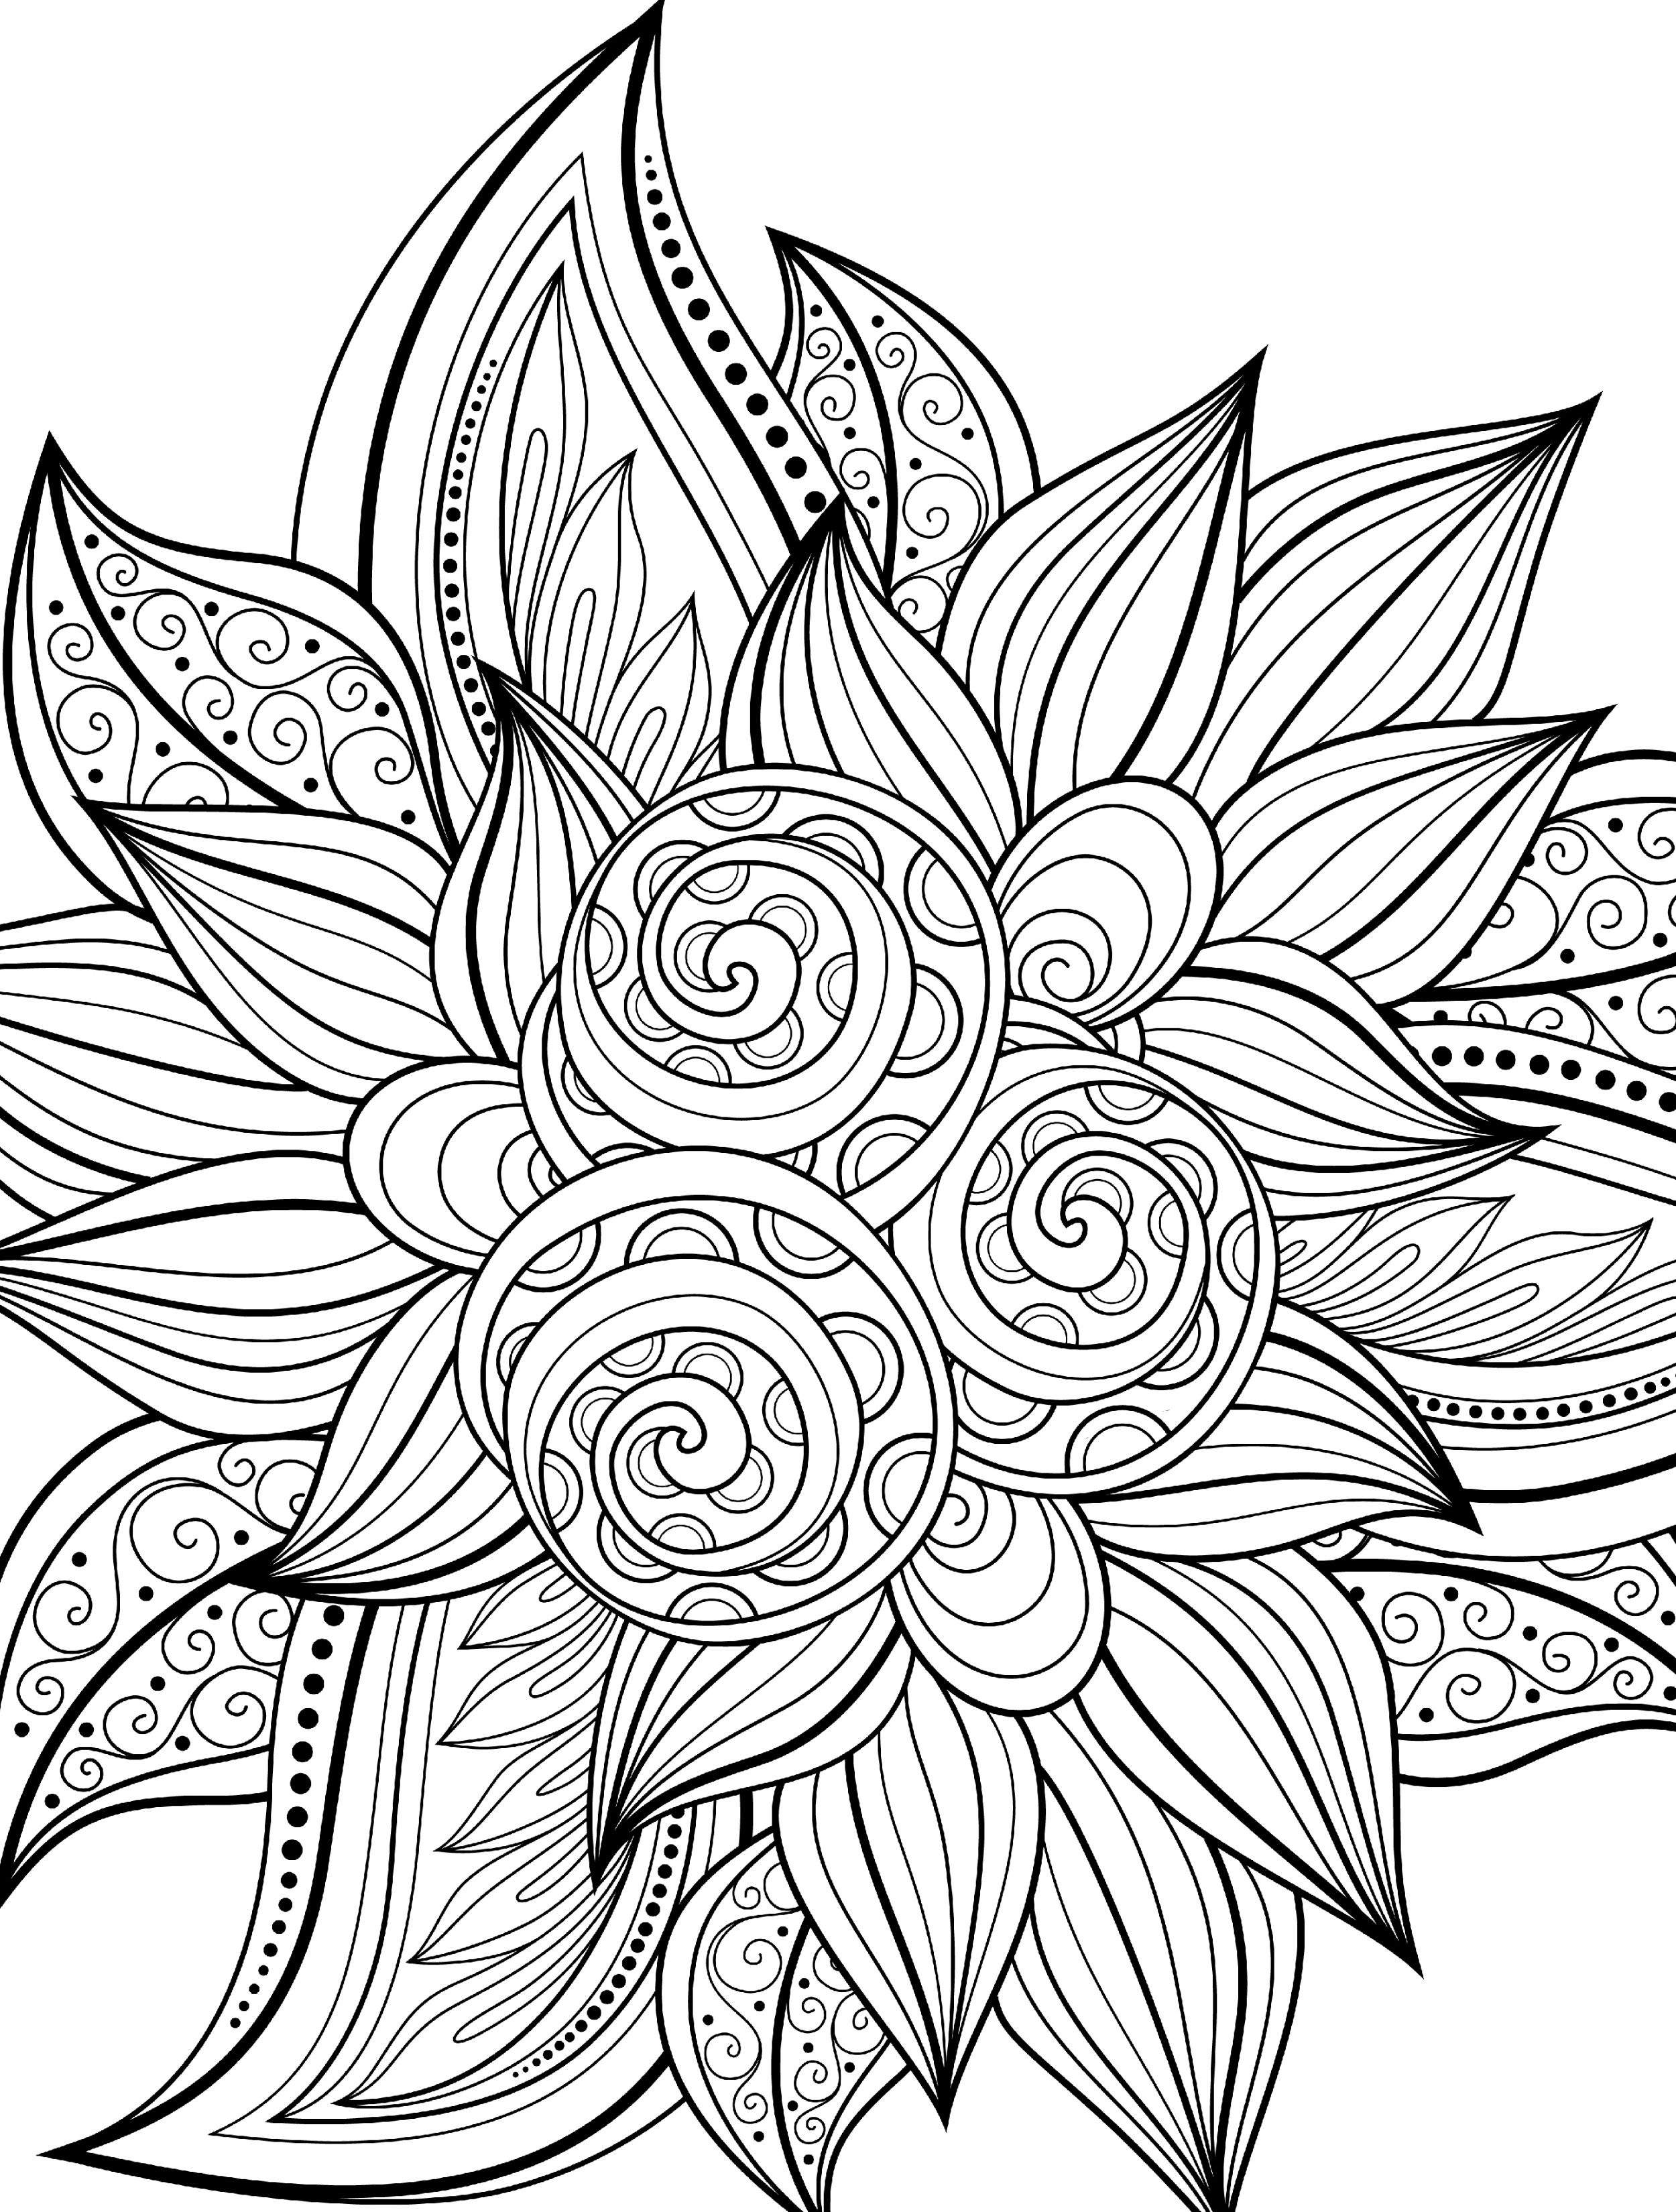 Printable Adult Coloring Pages - Coloring Home